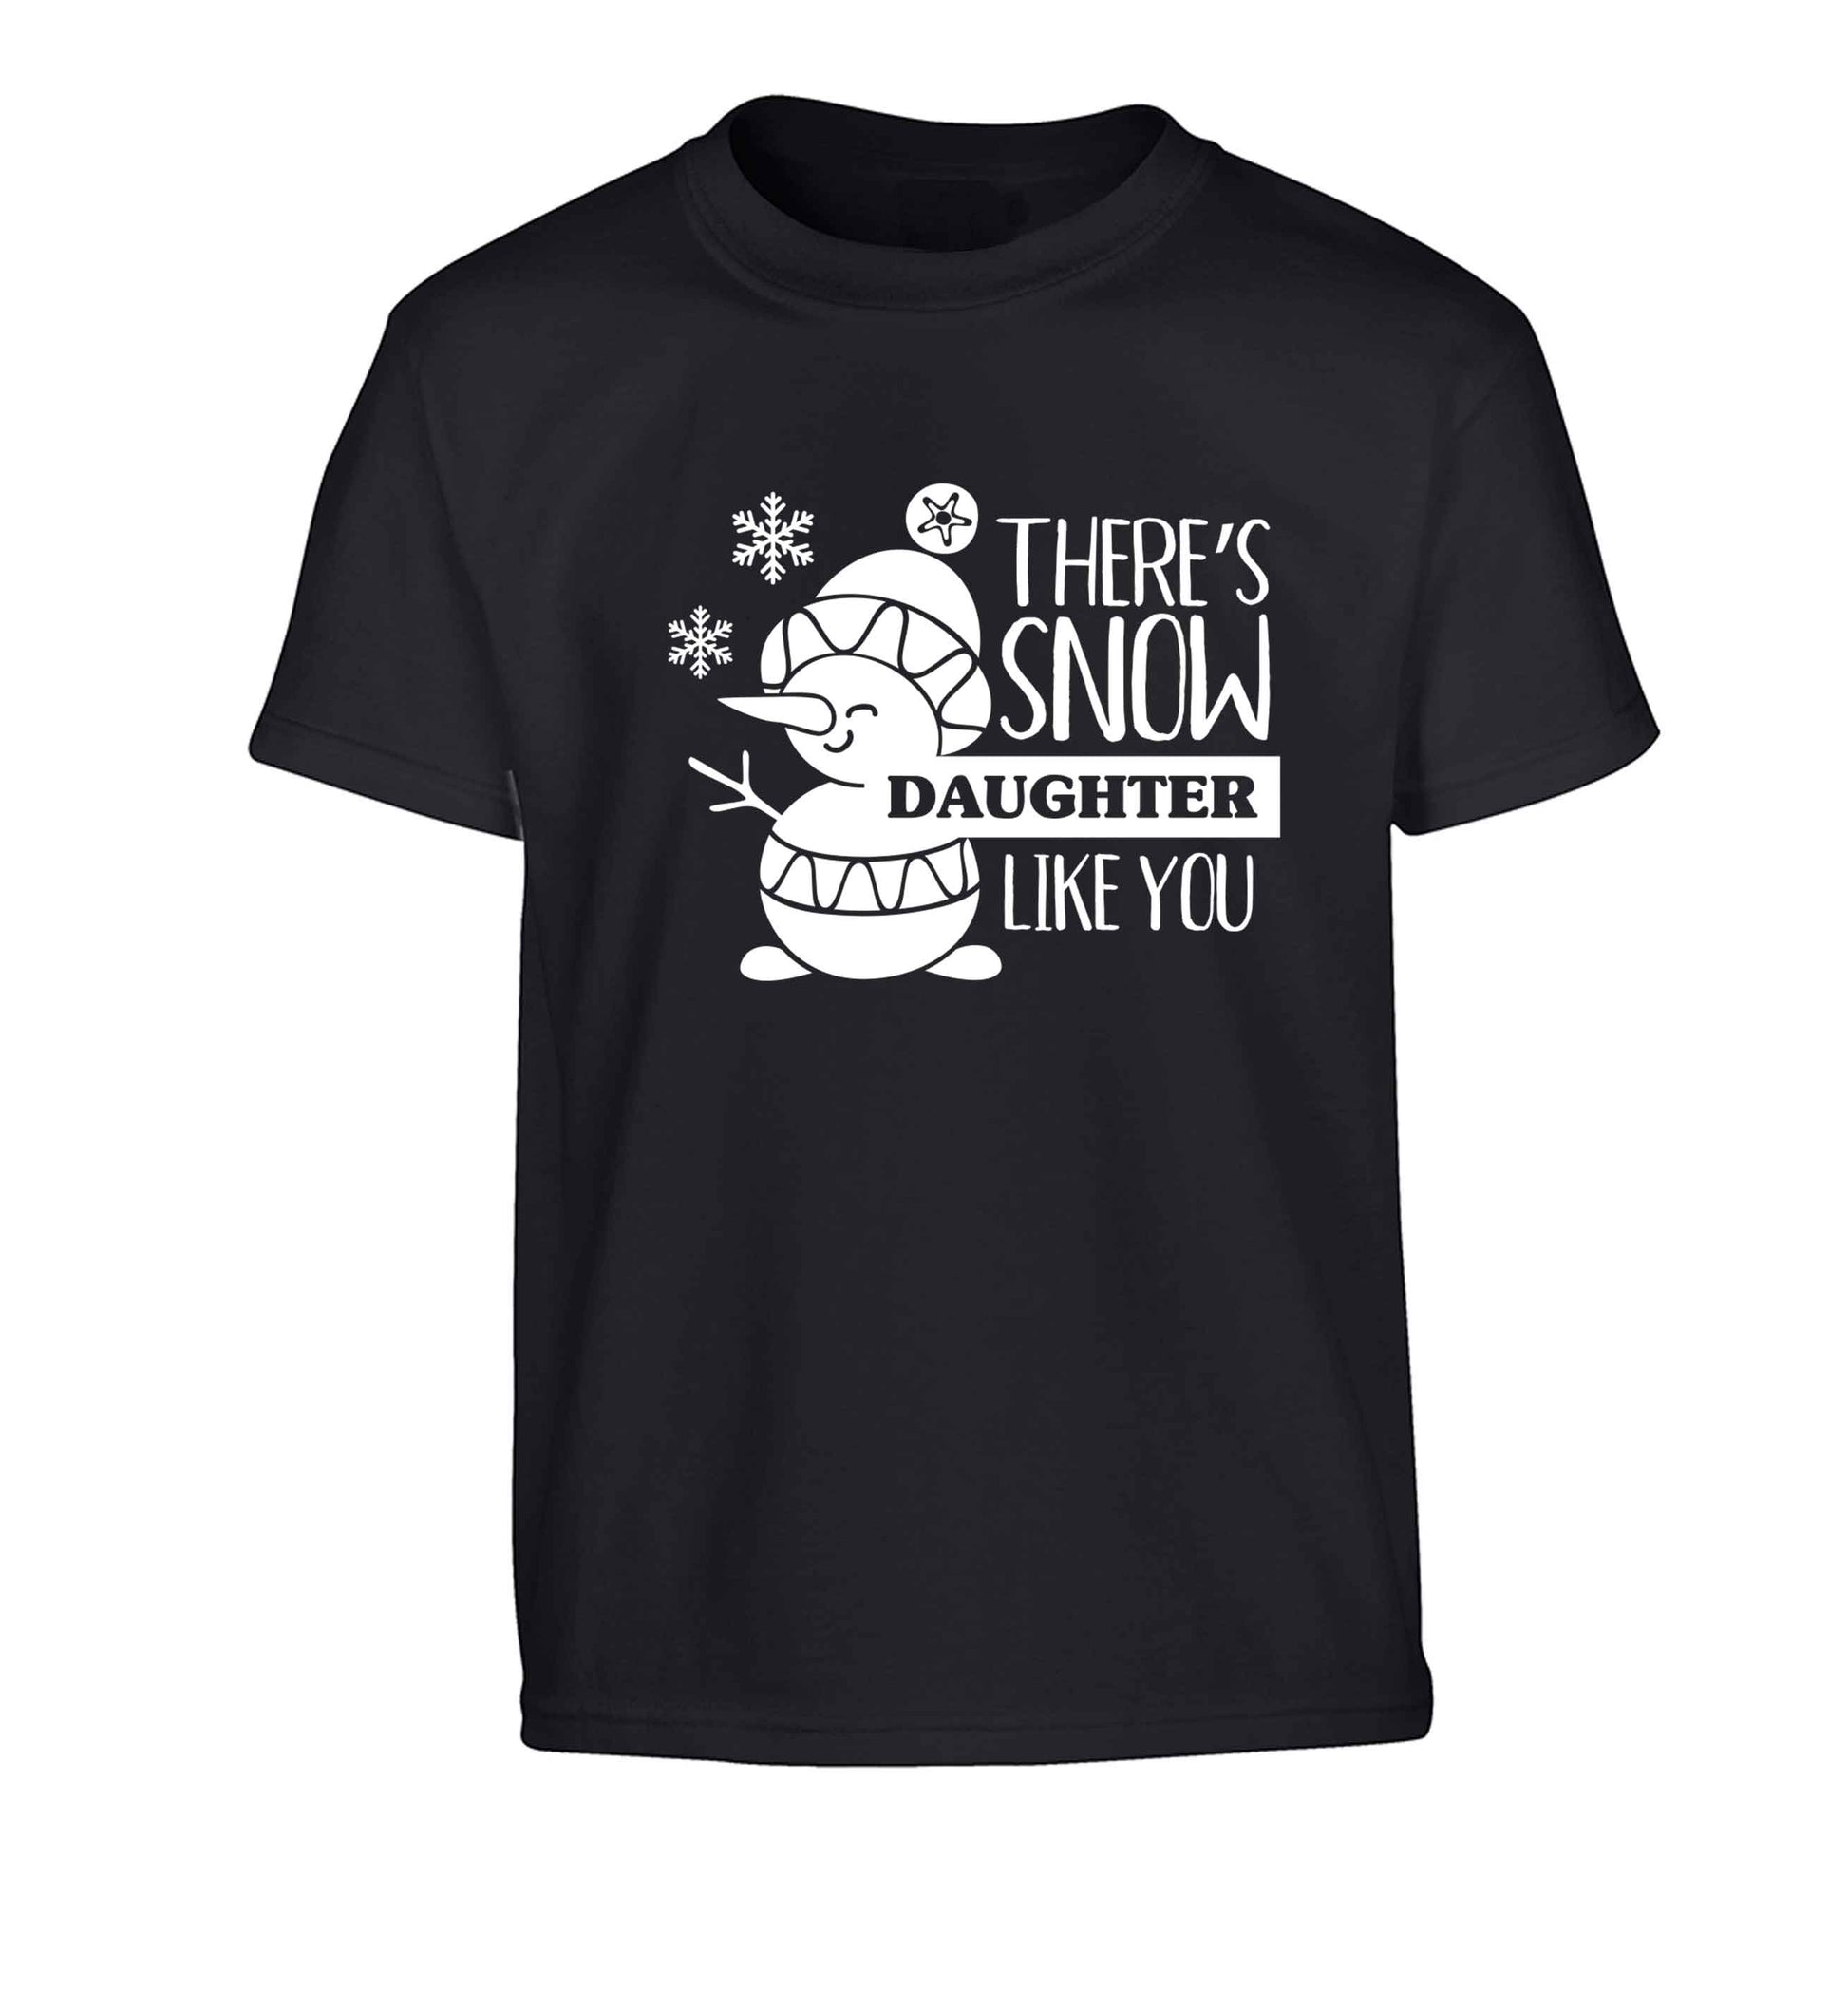 There's snow daughter like you Children's black Tshirt 12-13 Years